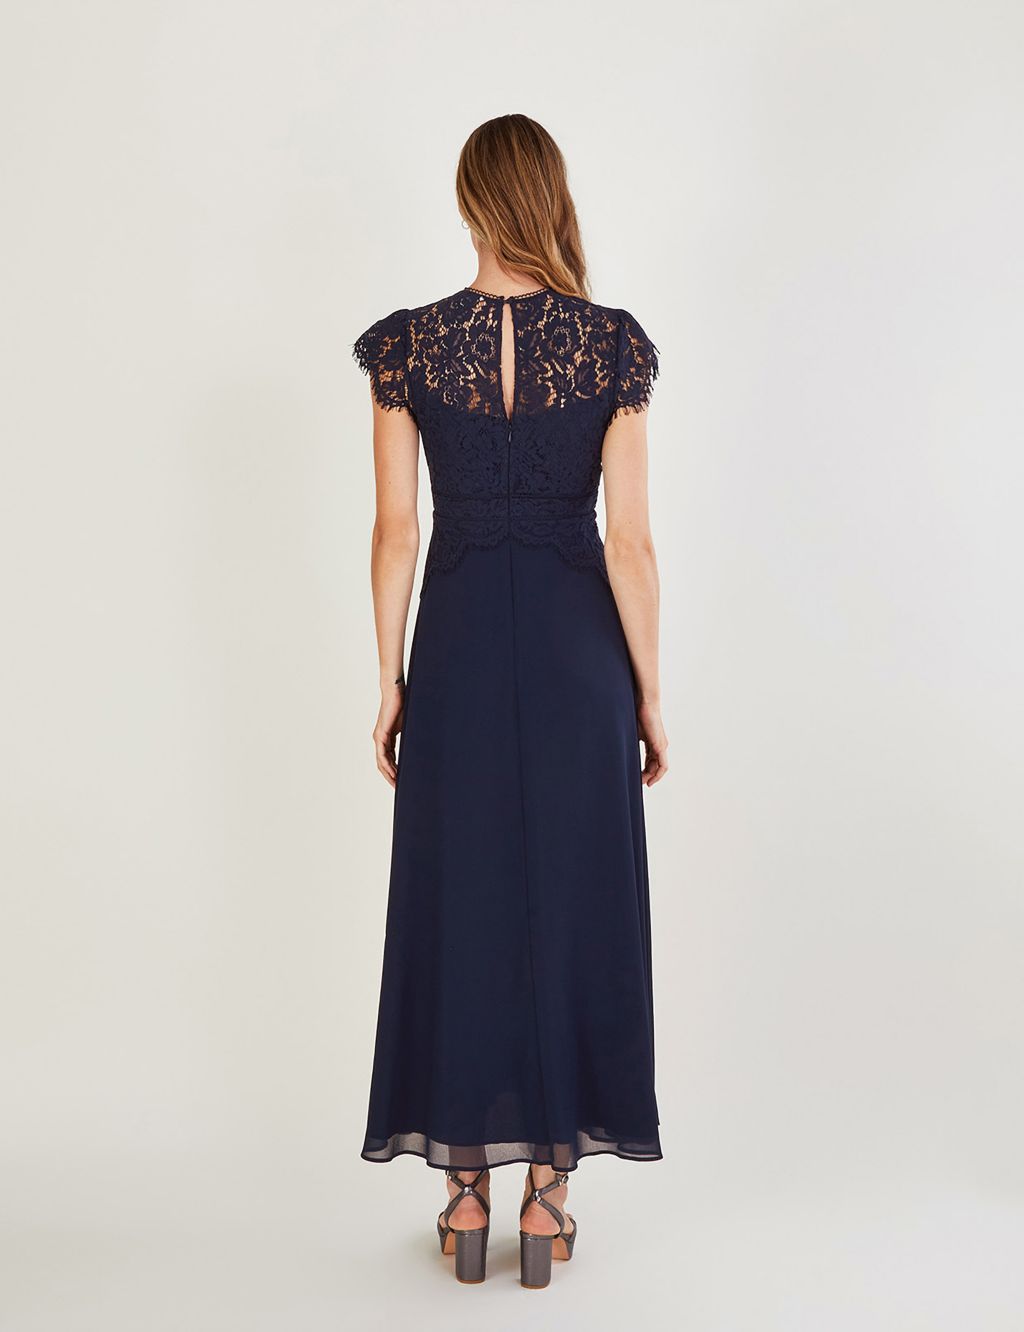 Lace Embroidered Maxi Waisted Dress image 3